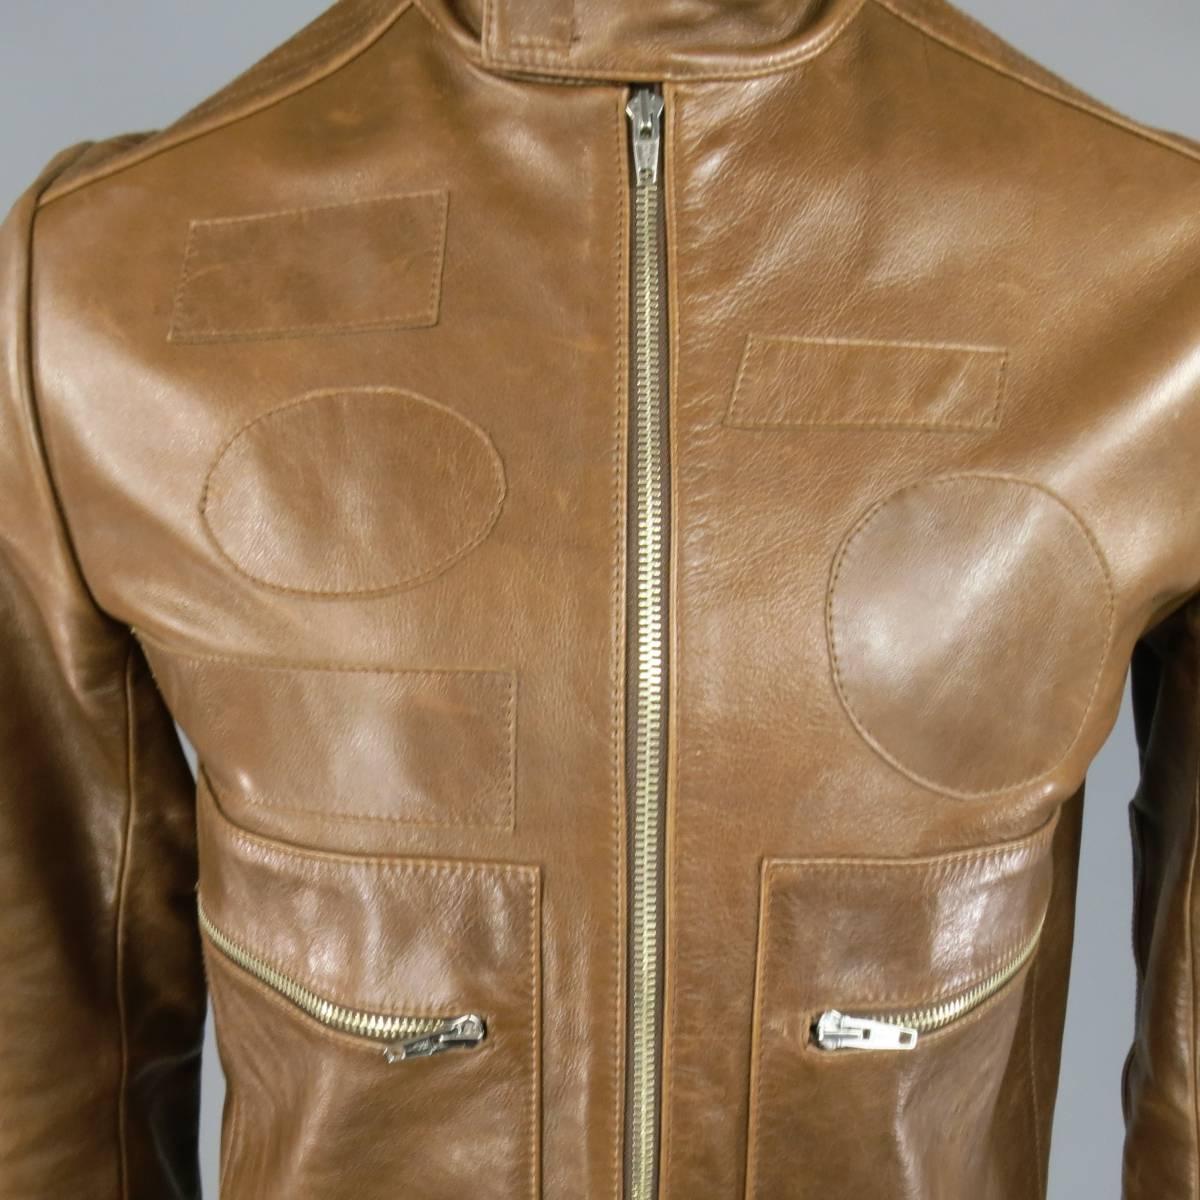 This awesome motorcycle jacket comes in a structured light brown leather and features a stand up collar with velcro closure, zip up front, quilted elbow patches, zip velcro cuffs, double zip patch pockets, and various blank tone on tone patches